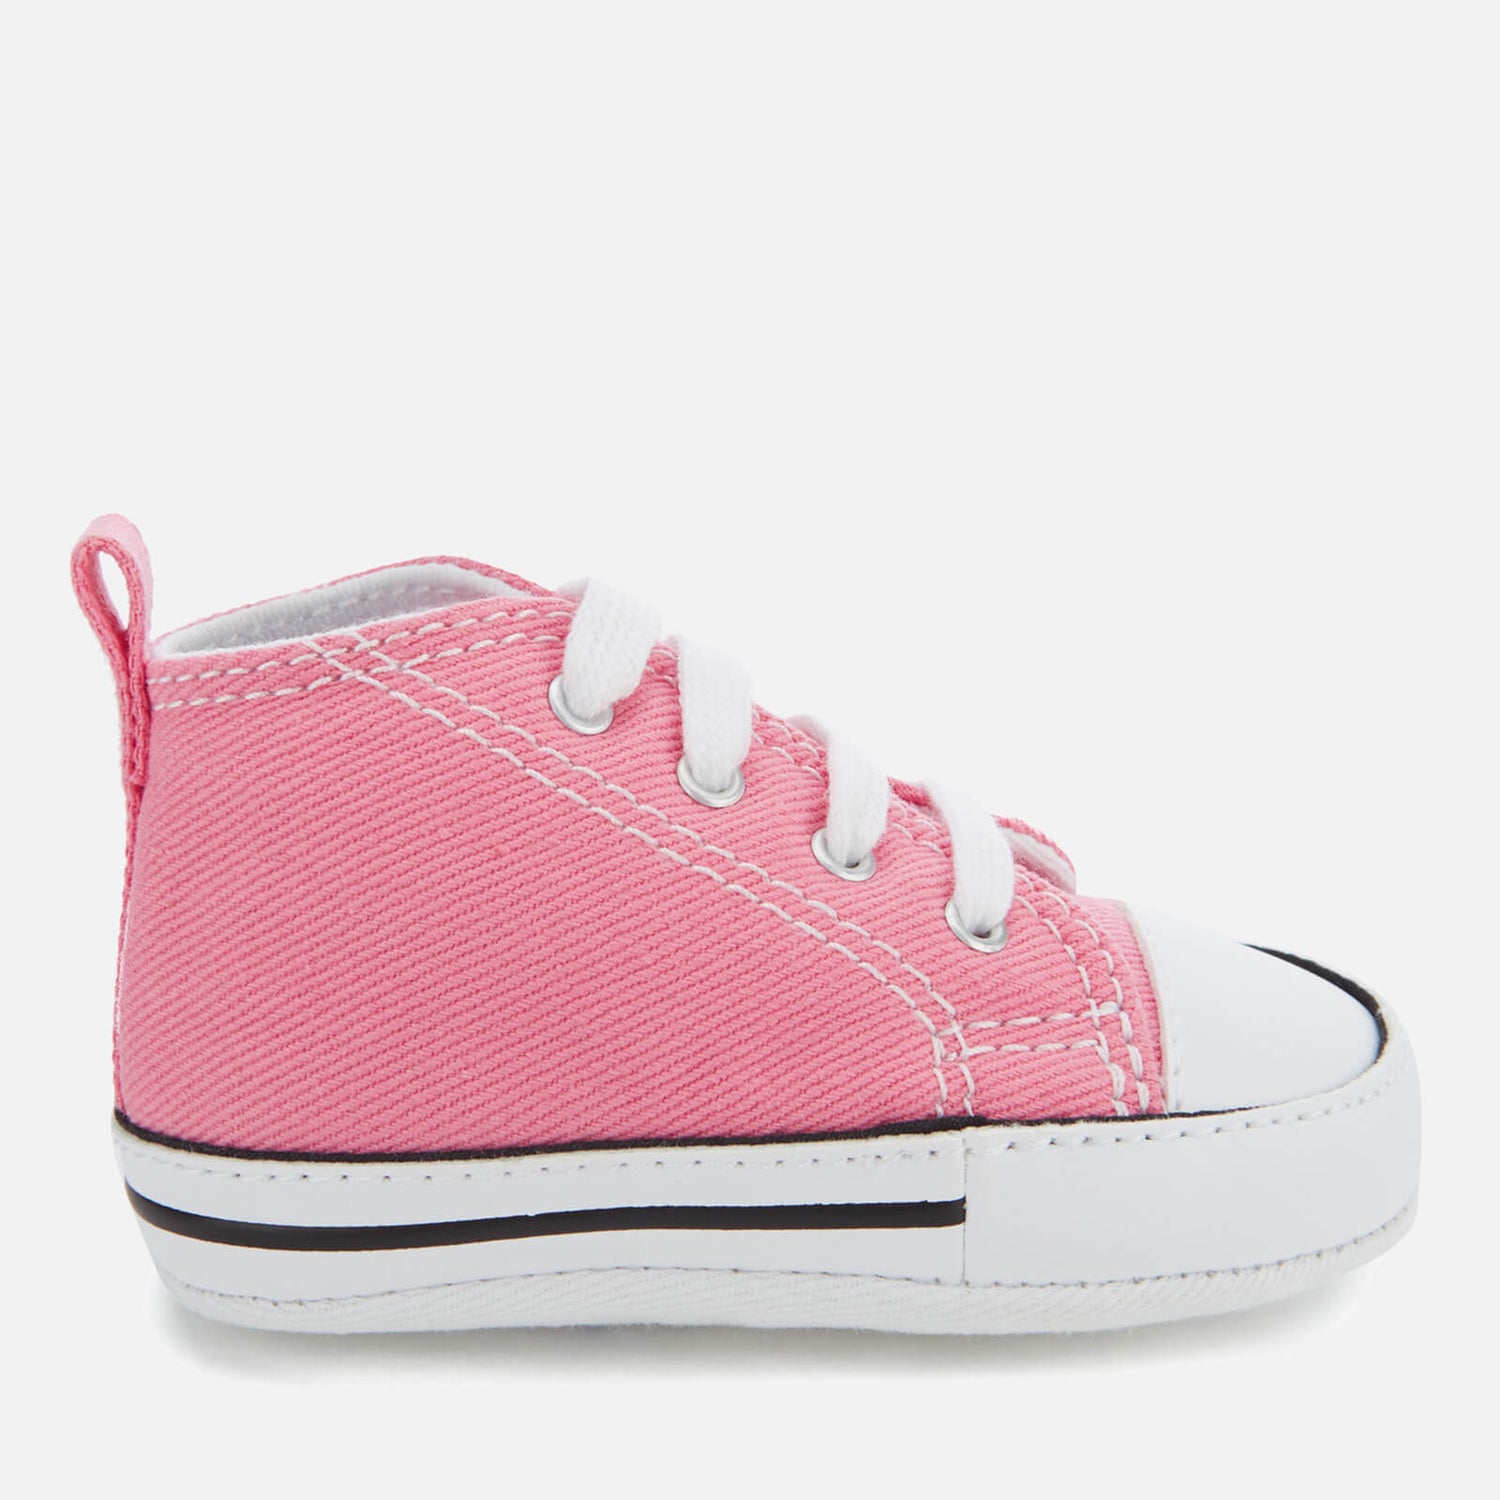 Converse Babies Chuck Taylor First Star Hi-Top Trainers - Pink | FREE ...